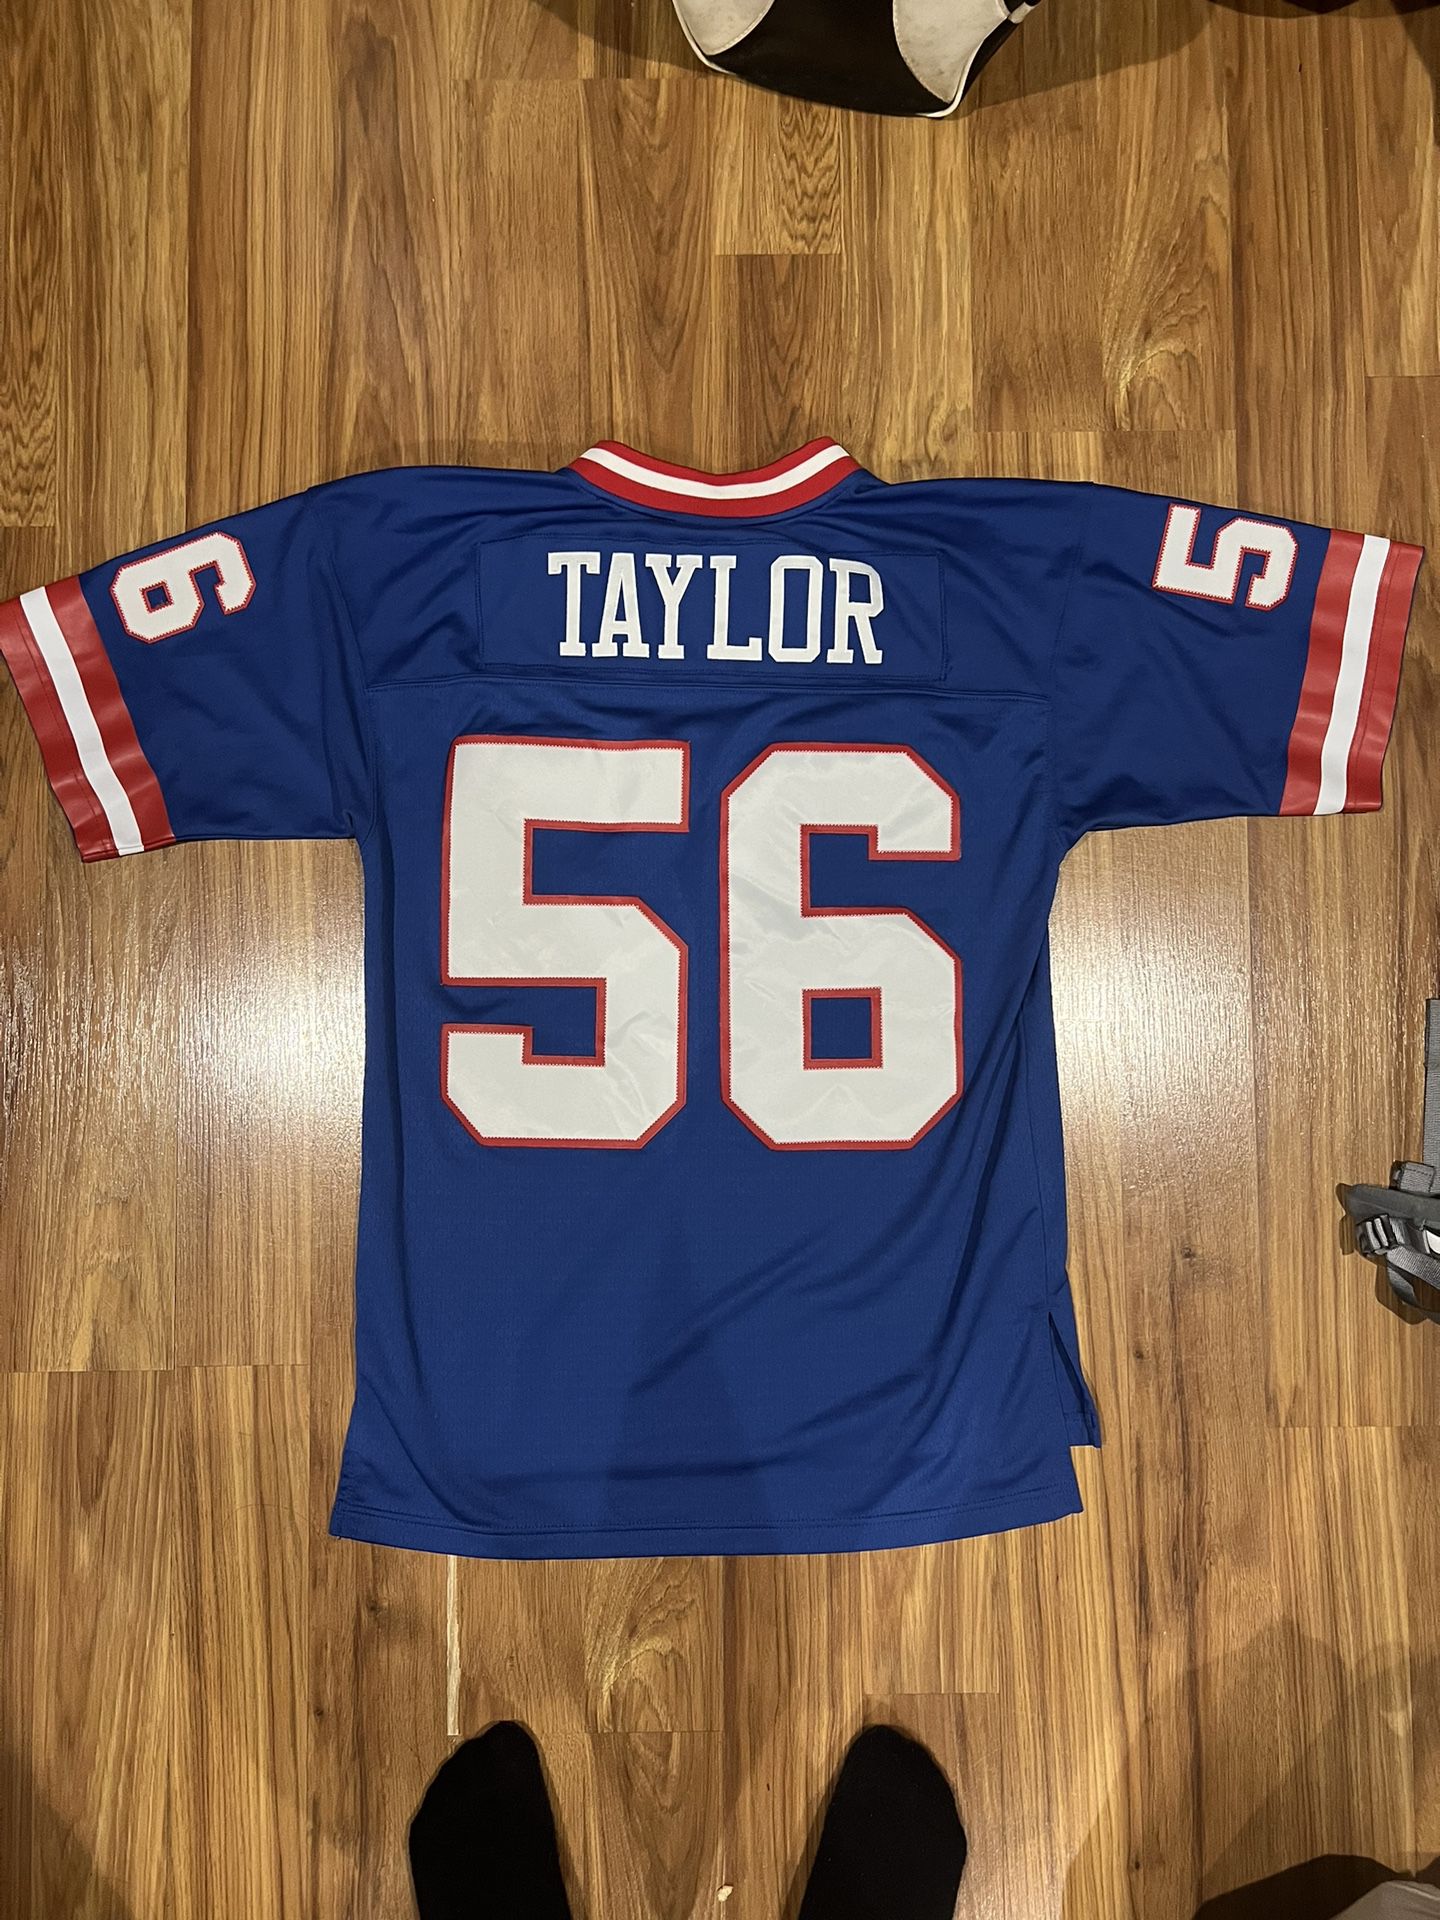 lawrence taylor jersey for sale